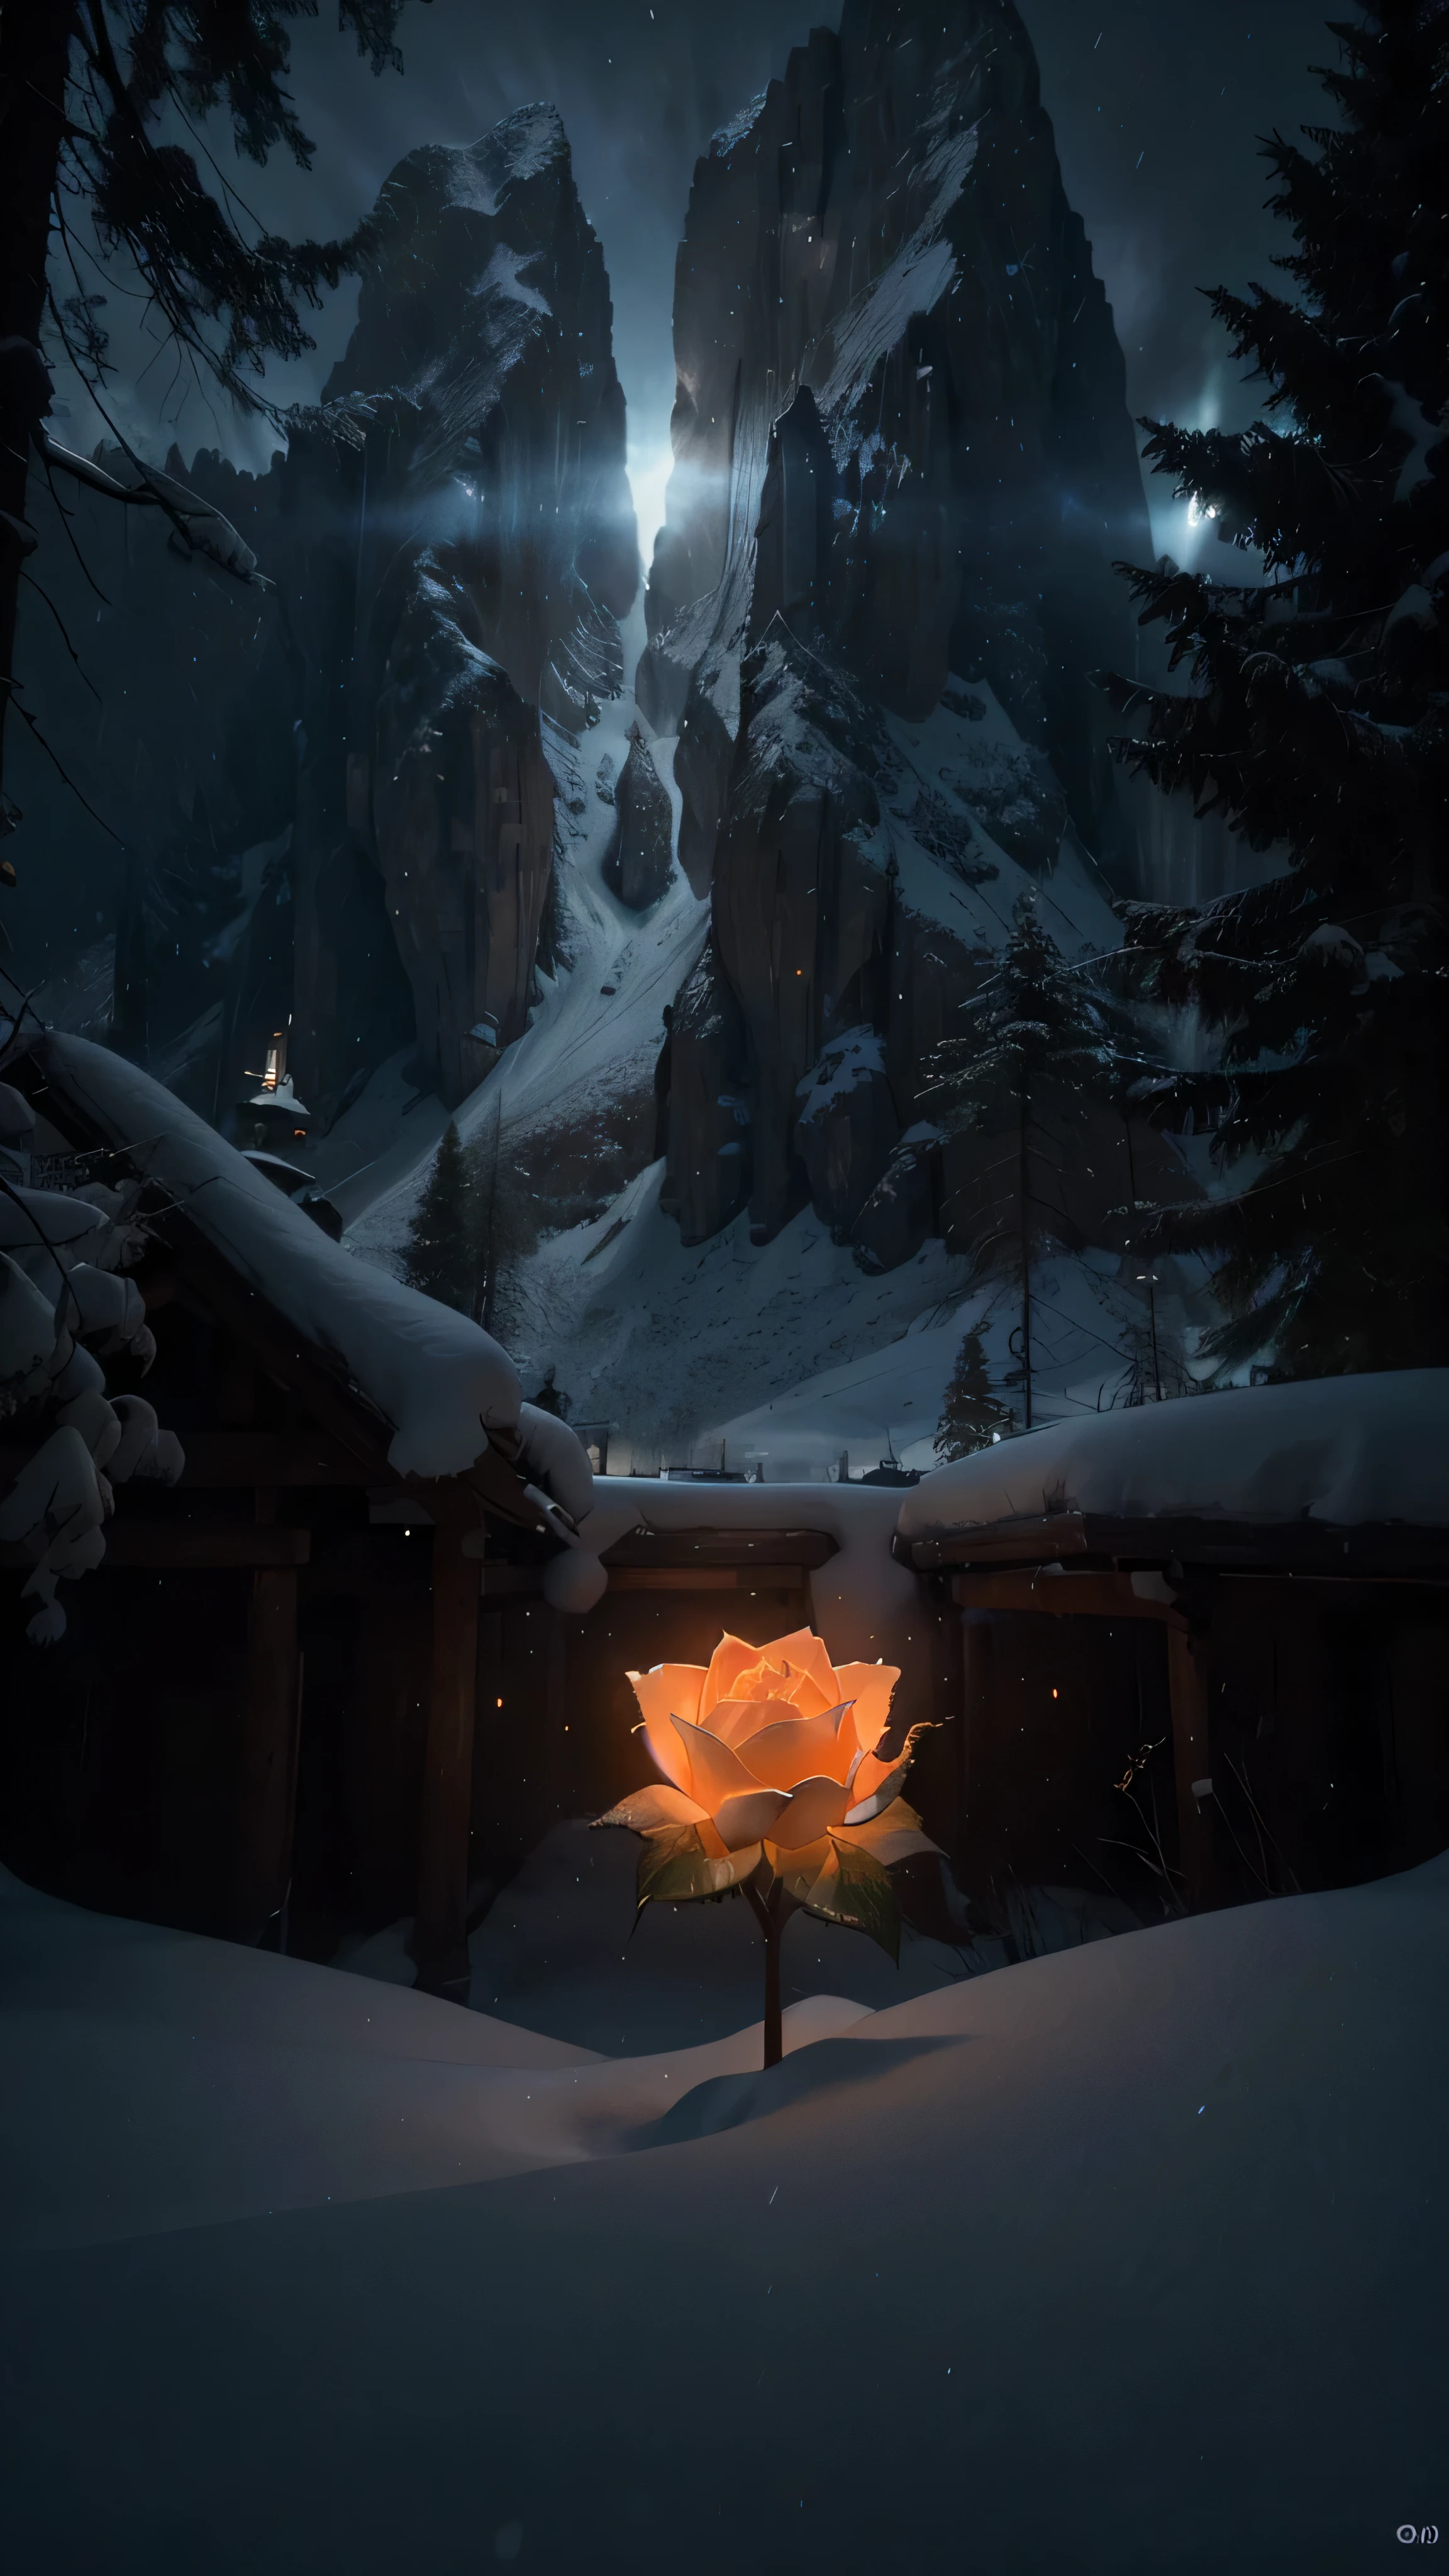 raw photo,, orange and white large transparent bioluminescent rose , white snowflakes around, snow-capped mountains and forests behind, Dark sky, nebula, galaxy, Focus, ultra-high quality, ultra-detailed Focus,, high detail, 8K, photorealistic, Dazzling, Rule of thirds, depth of field, complex parts, Conceptual art, bright colors, futuristic design, Attention to detail, grandeur and awe, A stunning visual masterpiece, hard light,